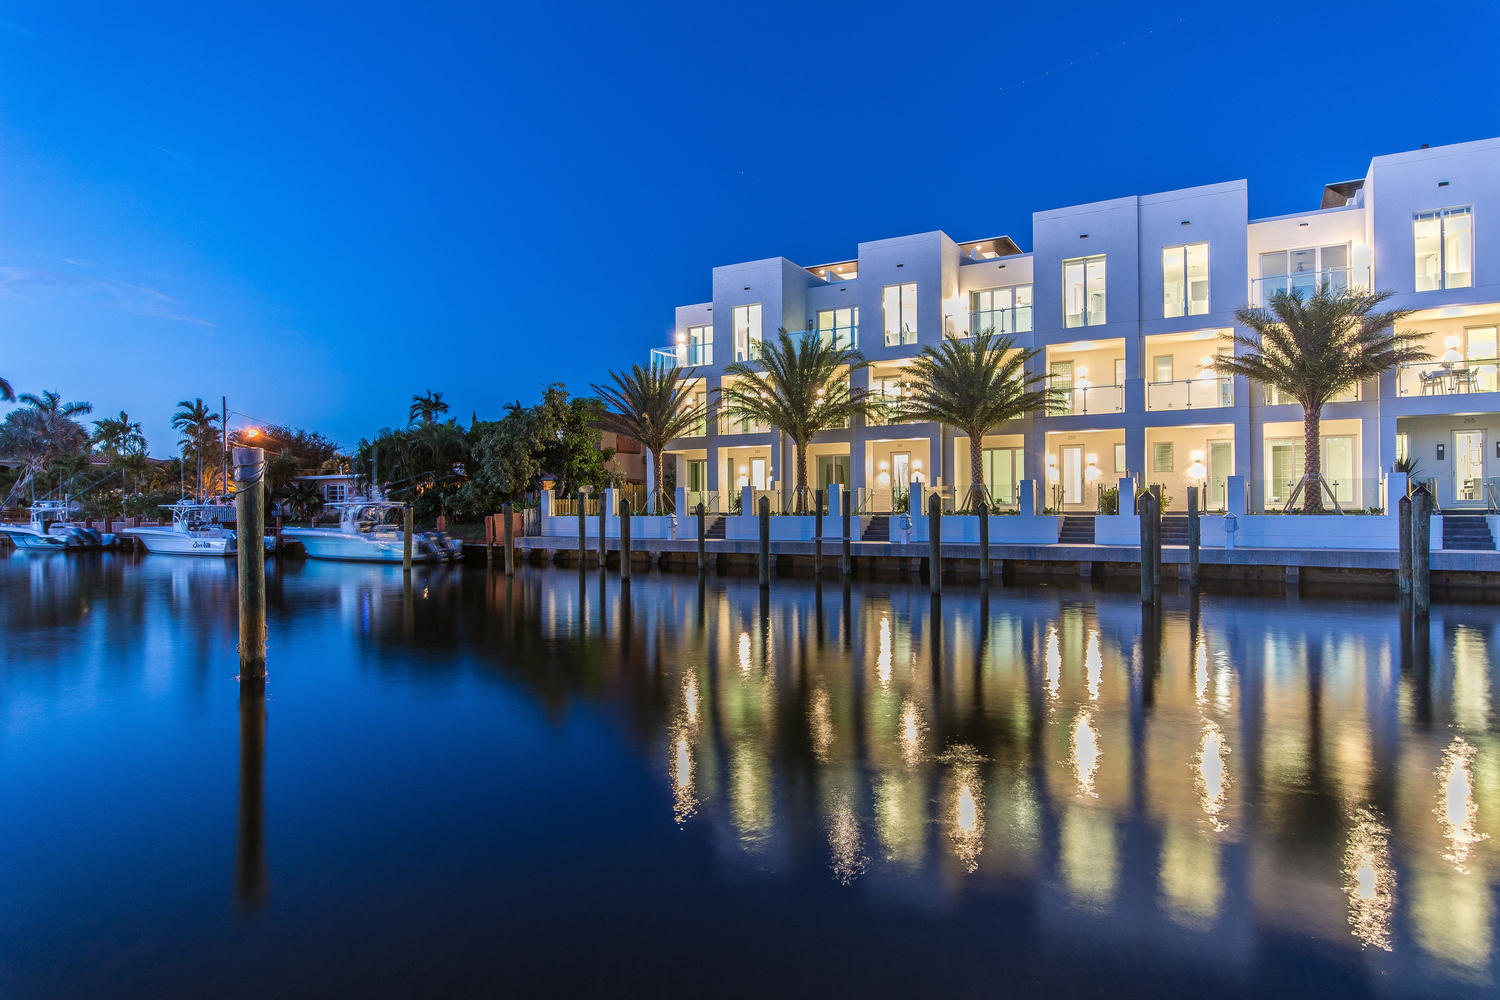 Sky230 Luxury Townhomes Lauderdale by the Sea